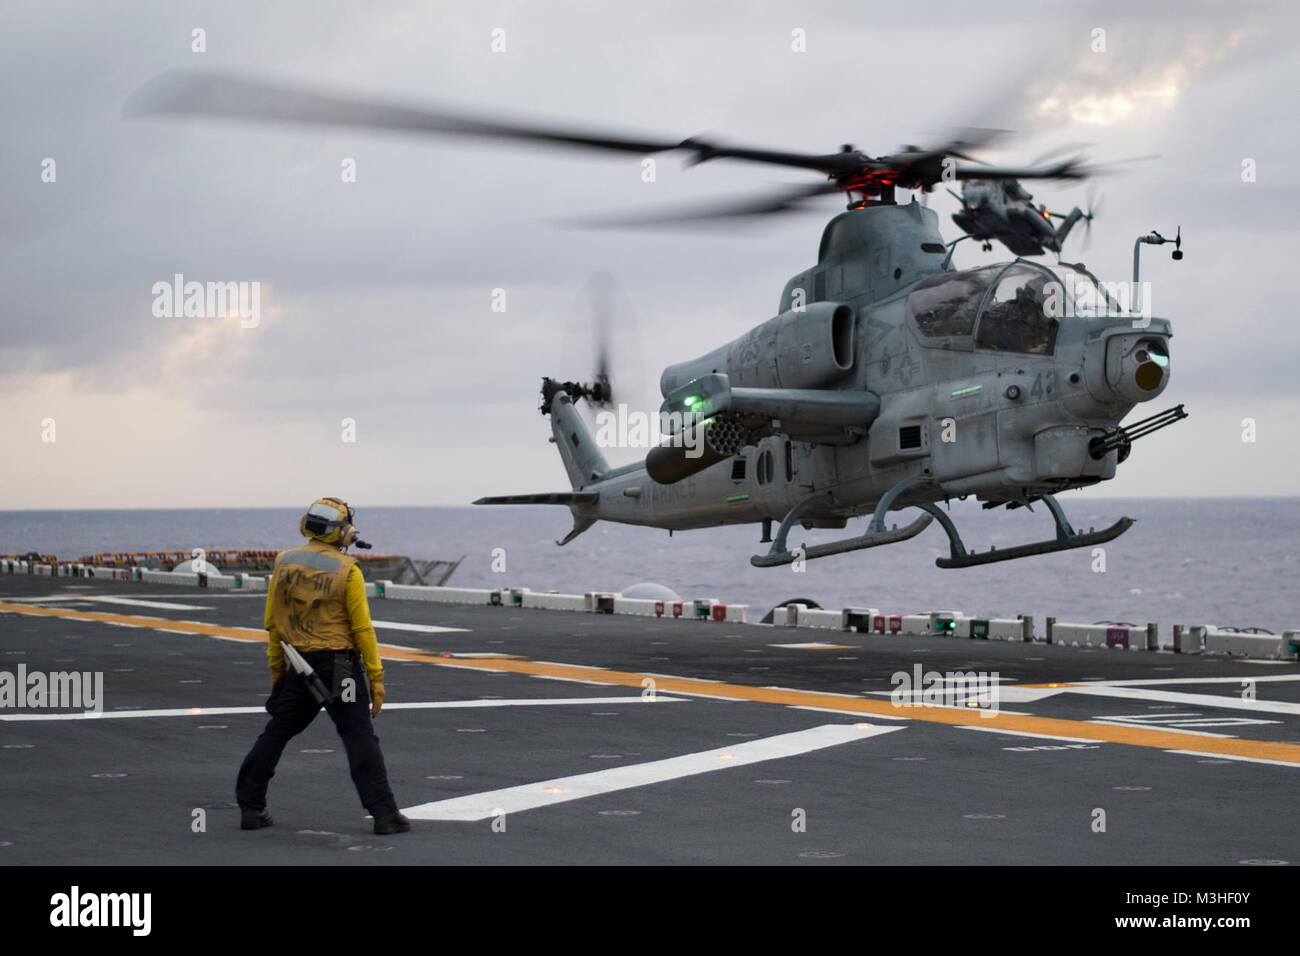 PHILIPPINE SEA (Feb. 4, 2018) An AH-1Z Viper helicopter assigned to the 'Gunfighters' of Marine Light Attack Helicopter Squadron (HMLA) 369 lands on the flight deck of the amphibious assault ship USS Bonhomme Richard (LHD 6). Bonhomme Richard is operating in the Indo-Asia-Pacific region as part of a regularly scheduled patrol and provides a rapid-response capability in the event of a regional contingency or natural disaster. (U.S. Navy Stock Photo